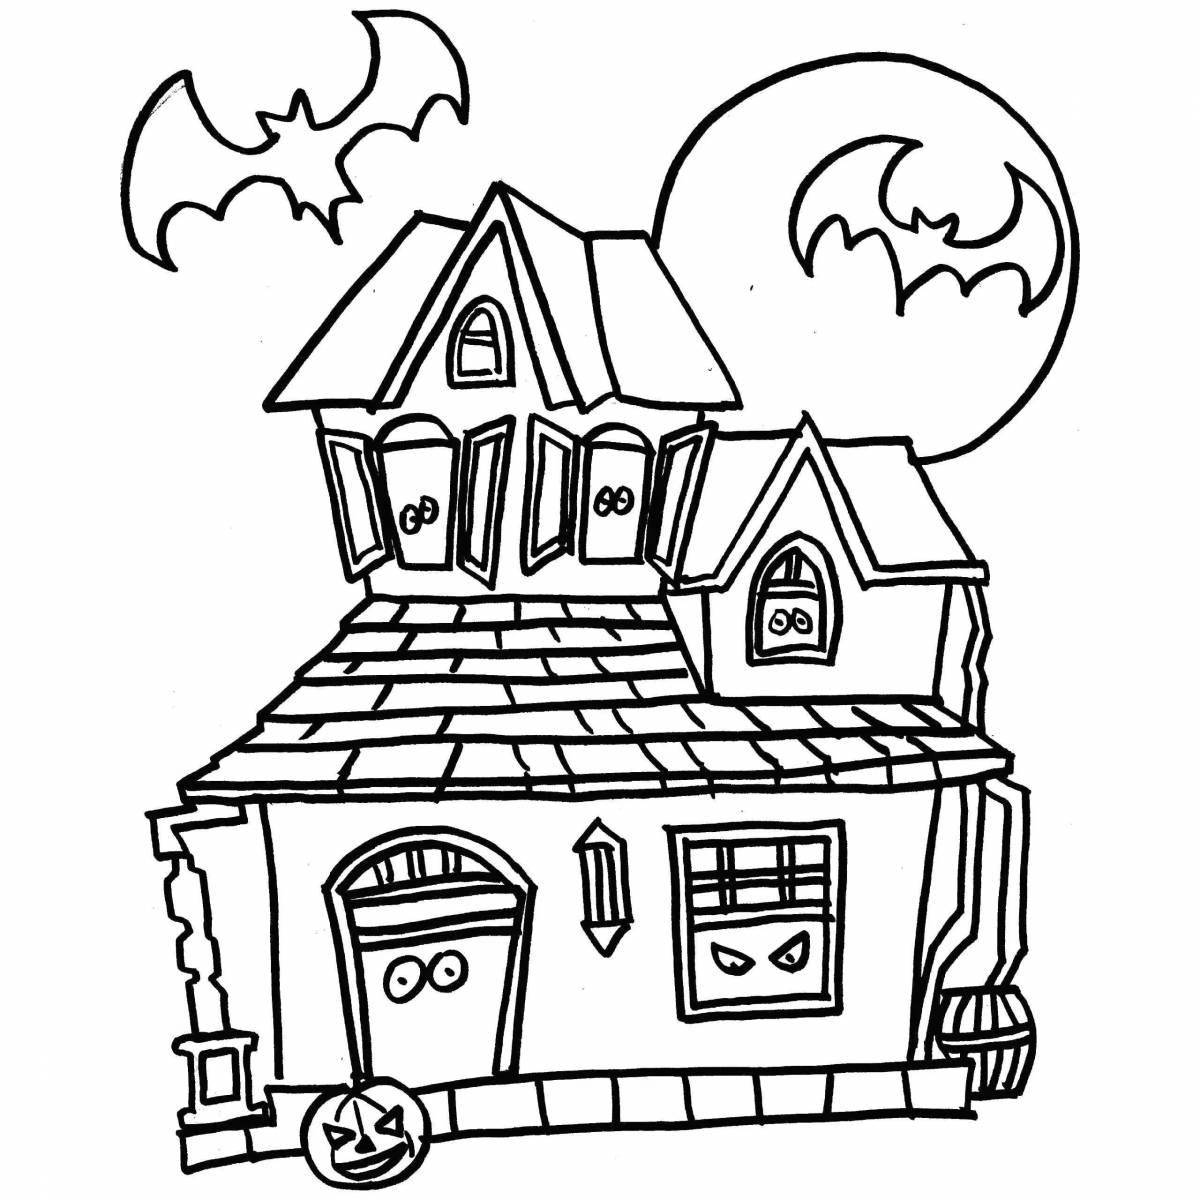 Great big house coloring book for kids